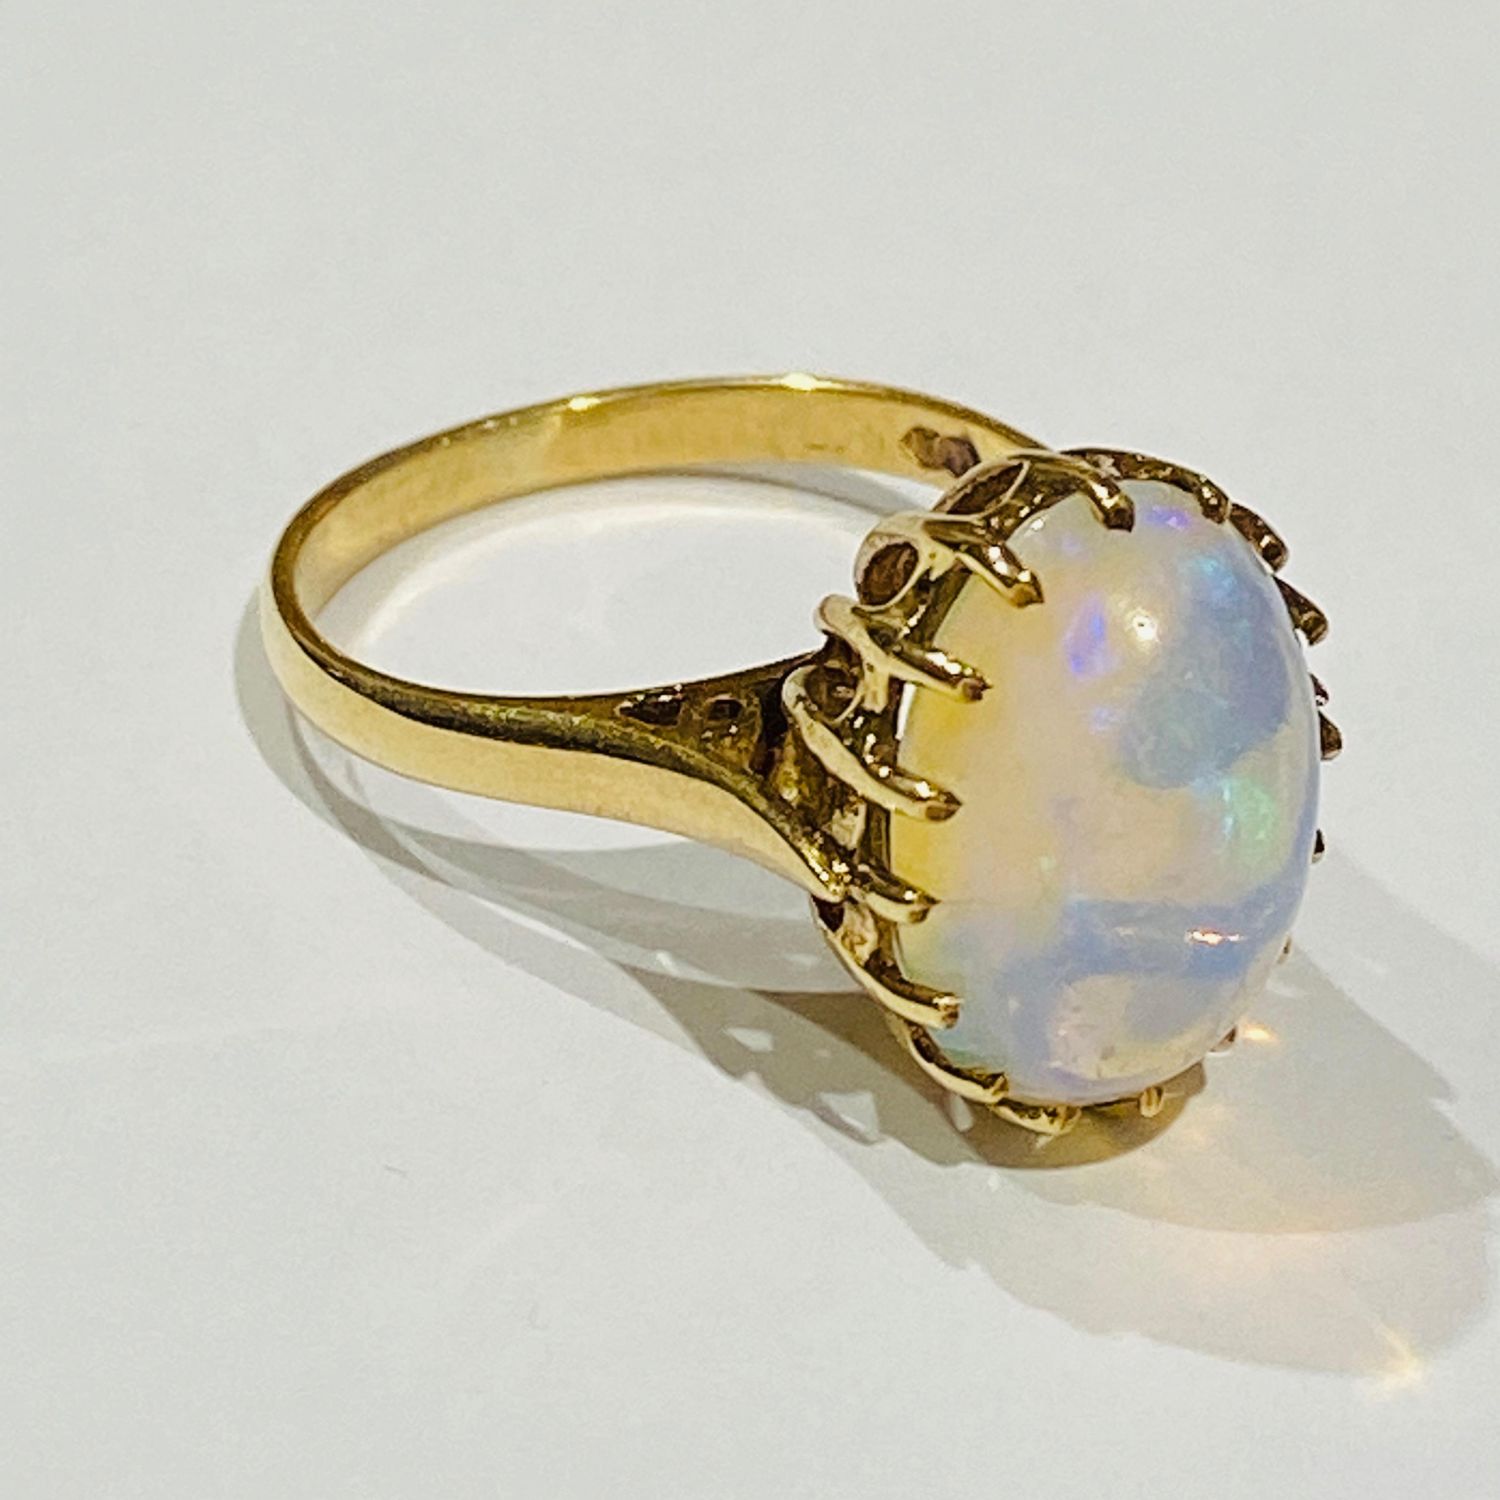 Opal solitaire ring